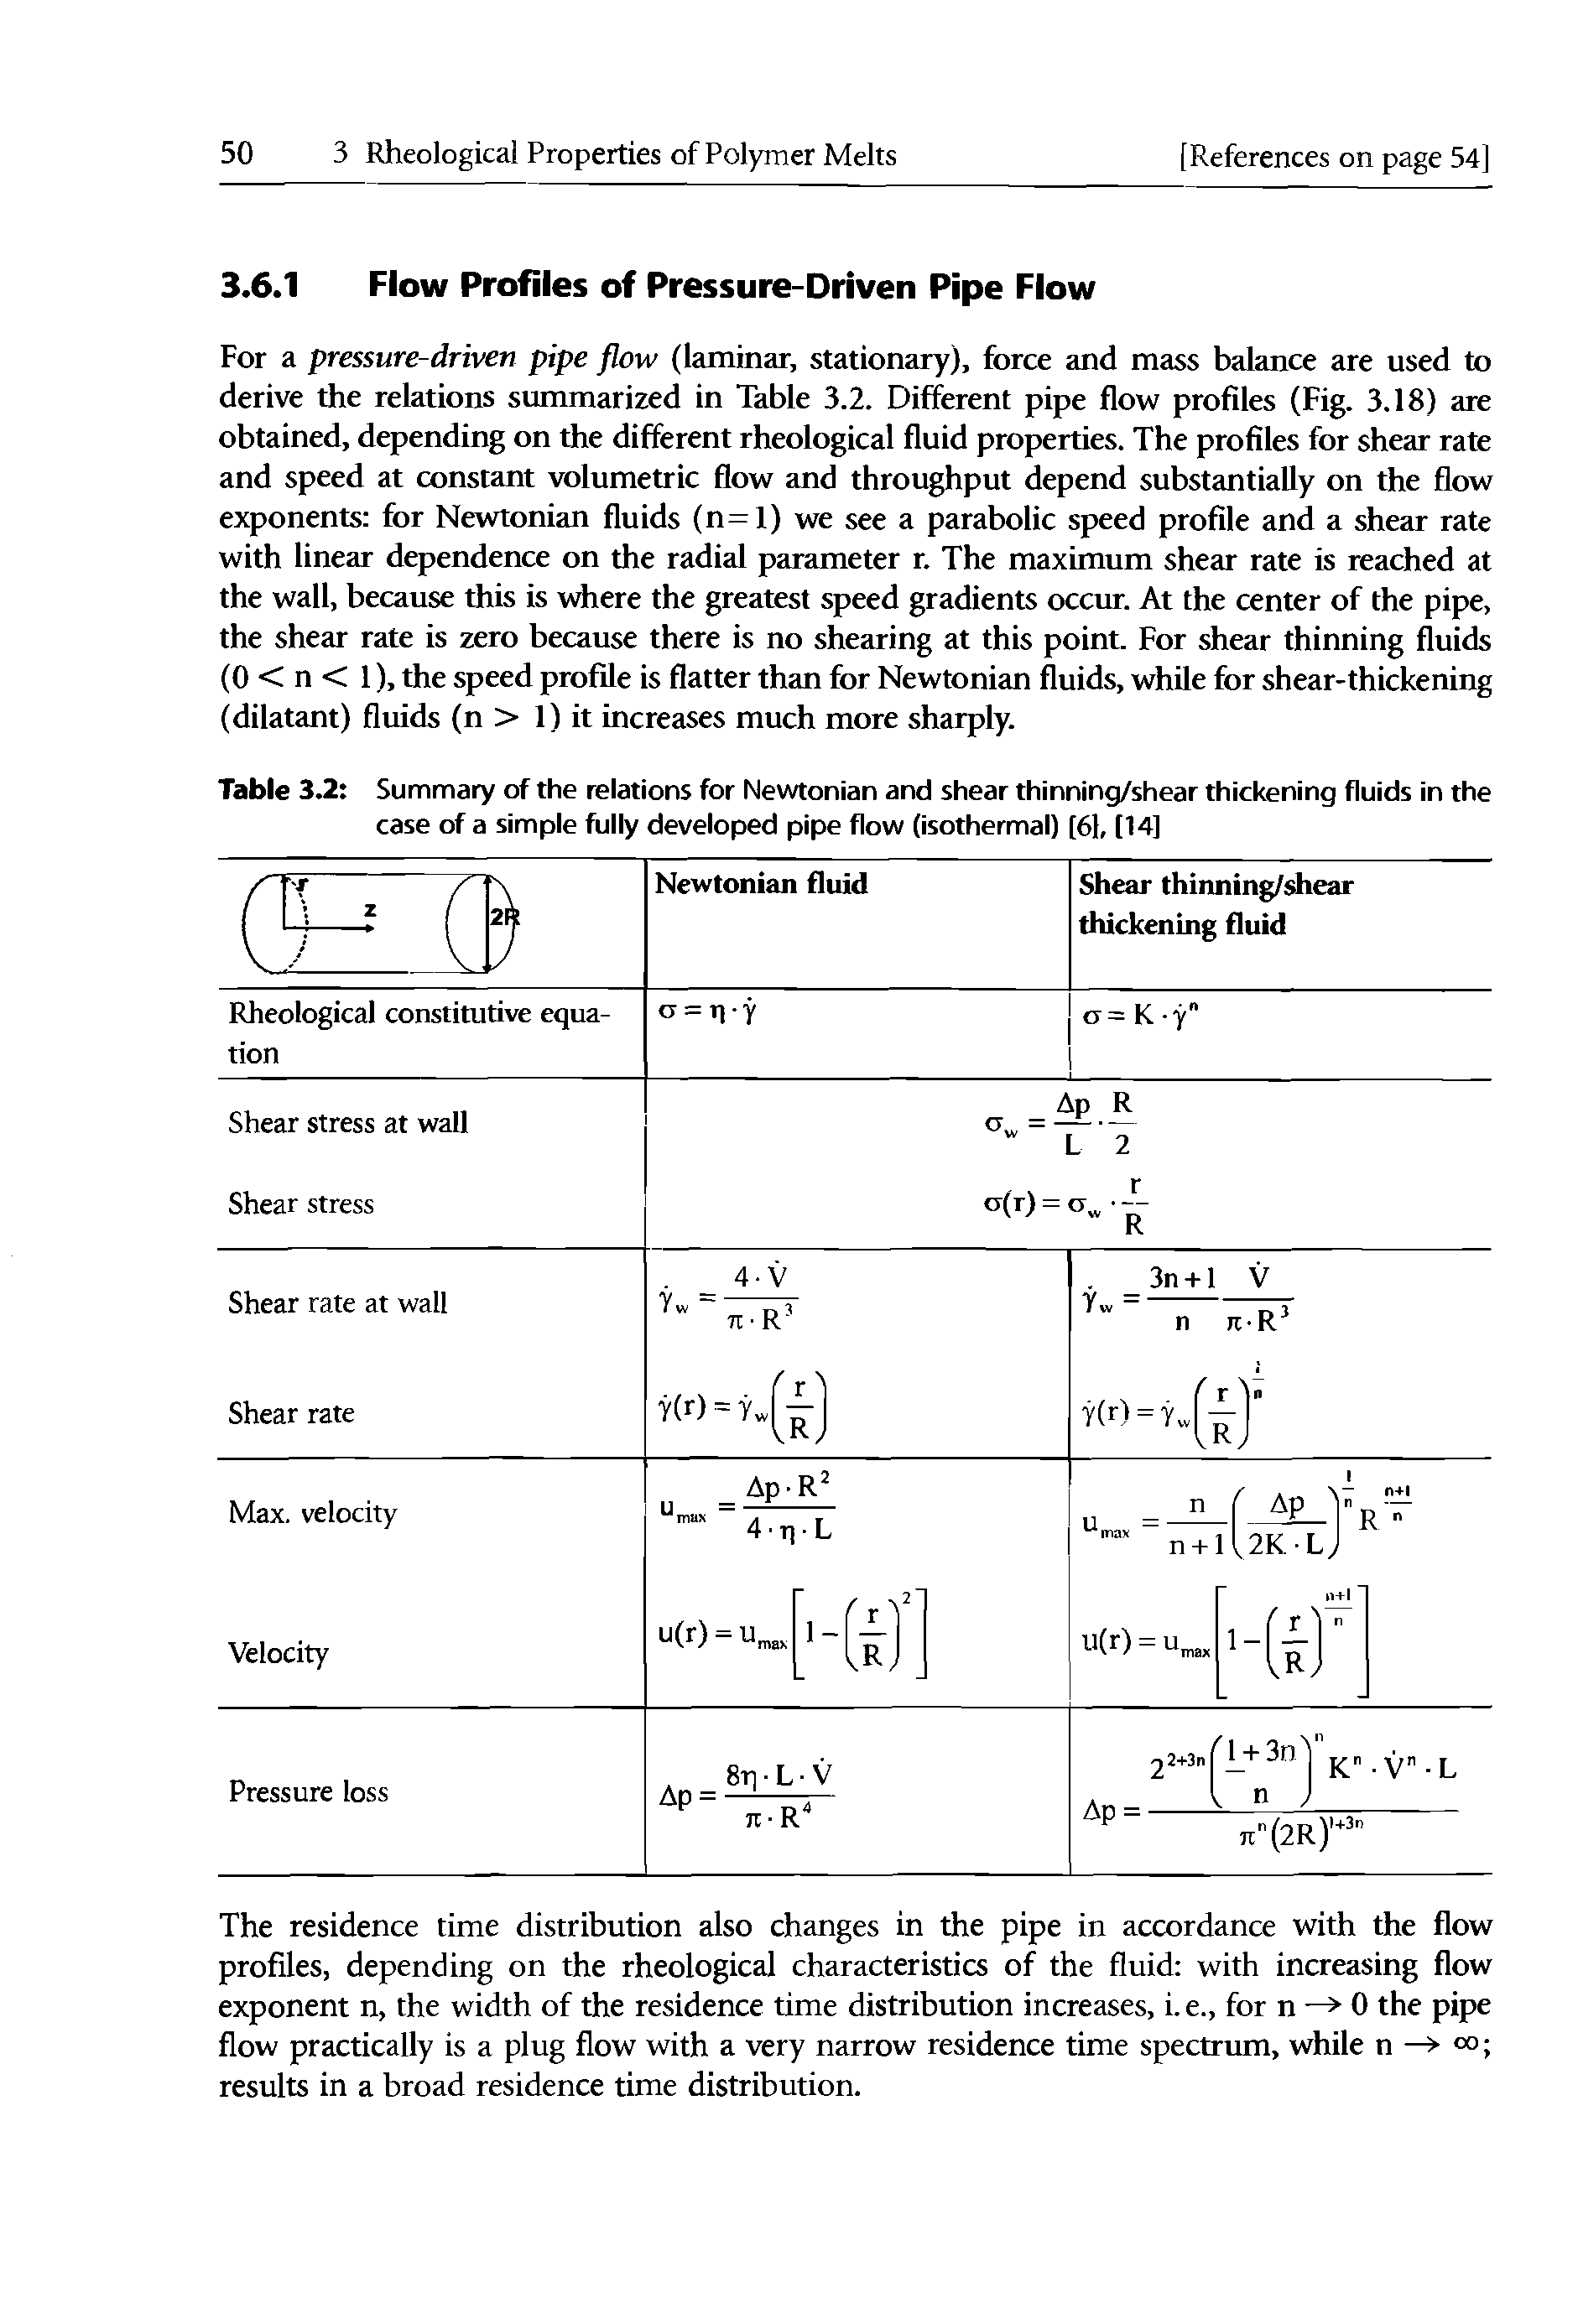 Table 3.2 Summary of the relations for Newtonian and shear thinning/shear thickening fluids in the case of a simple fully developed pipe flow (isothermal) [61, [14]...